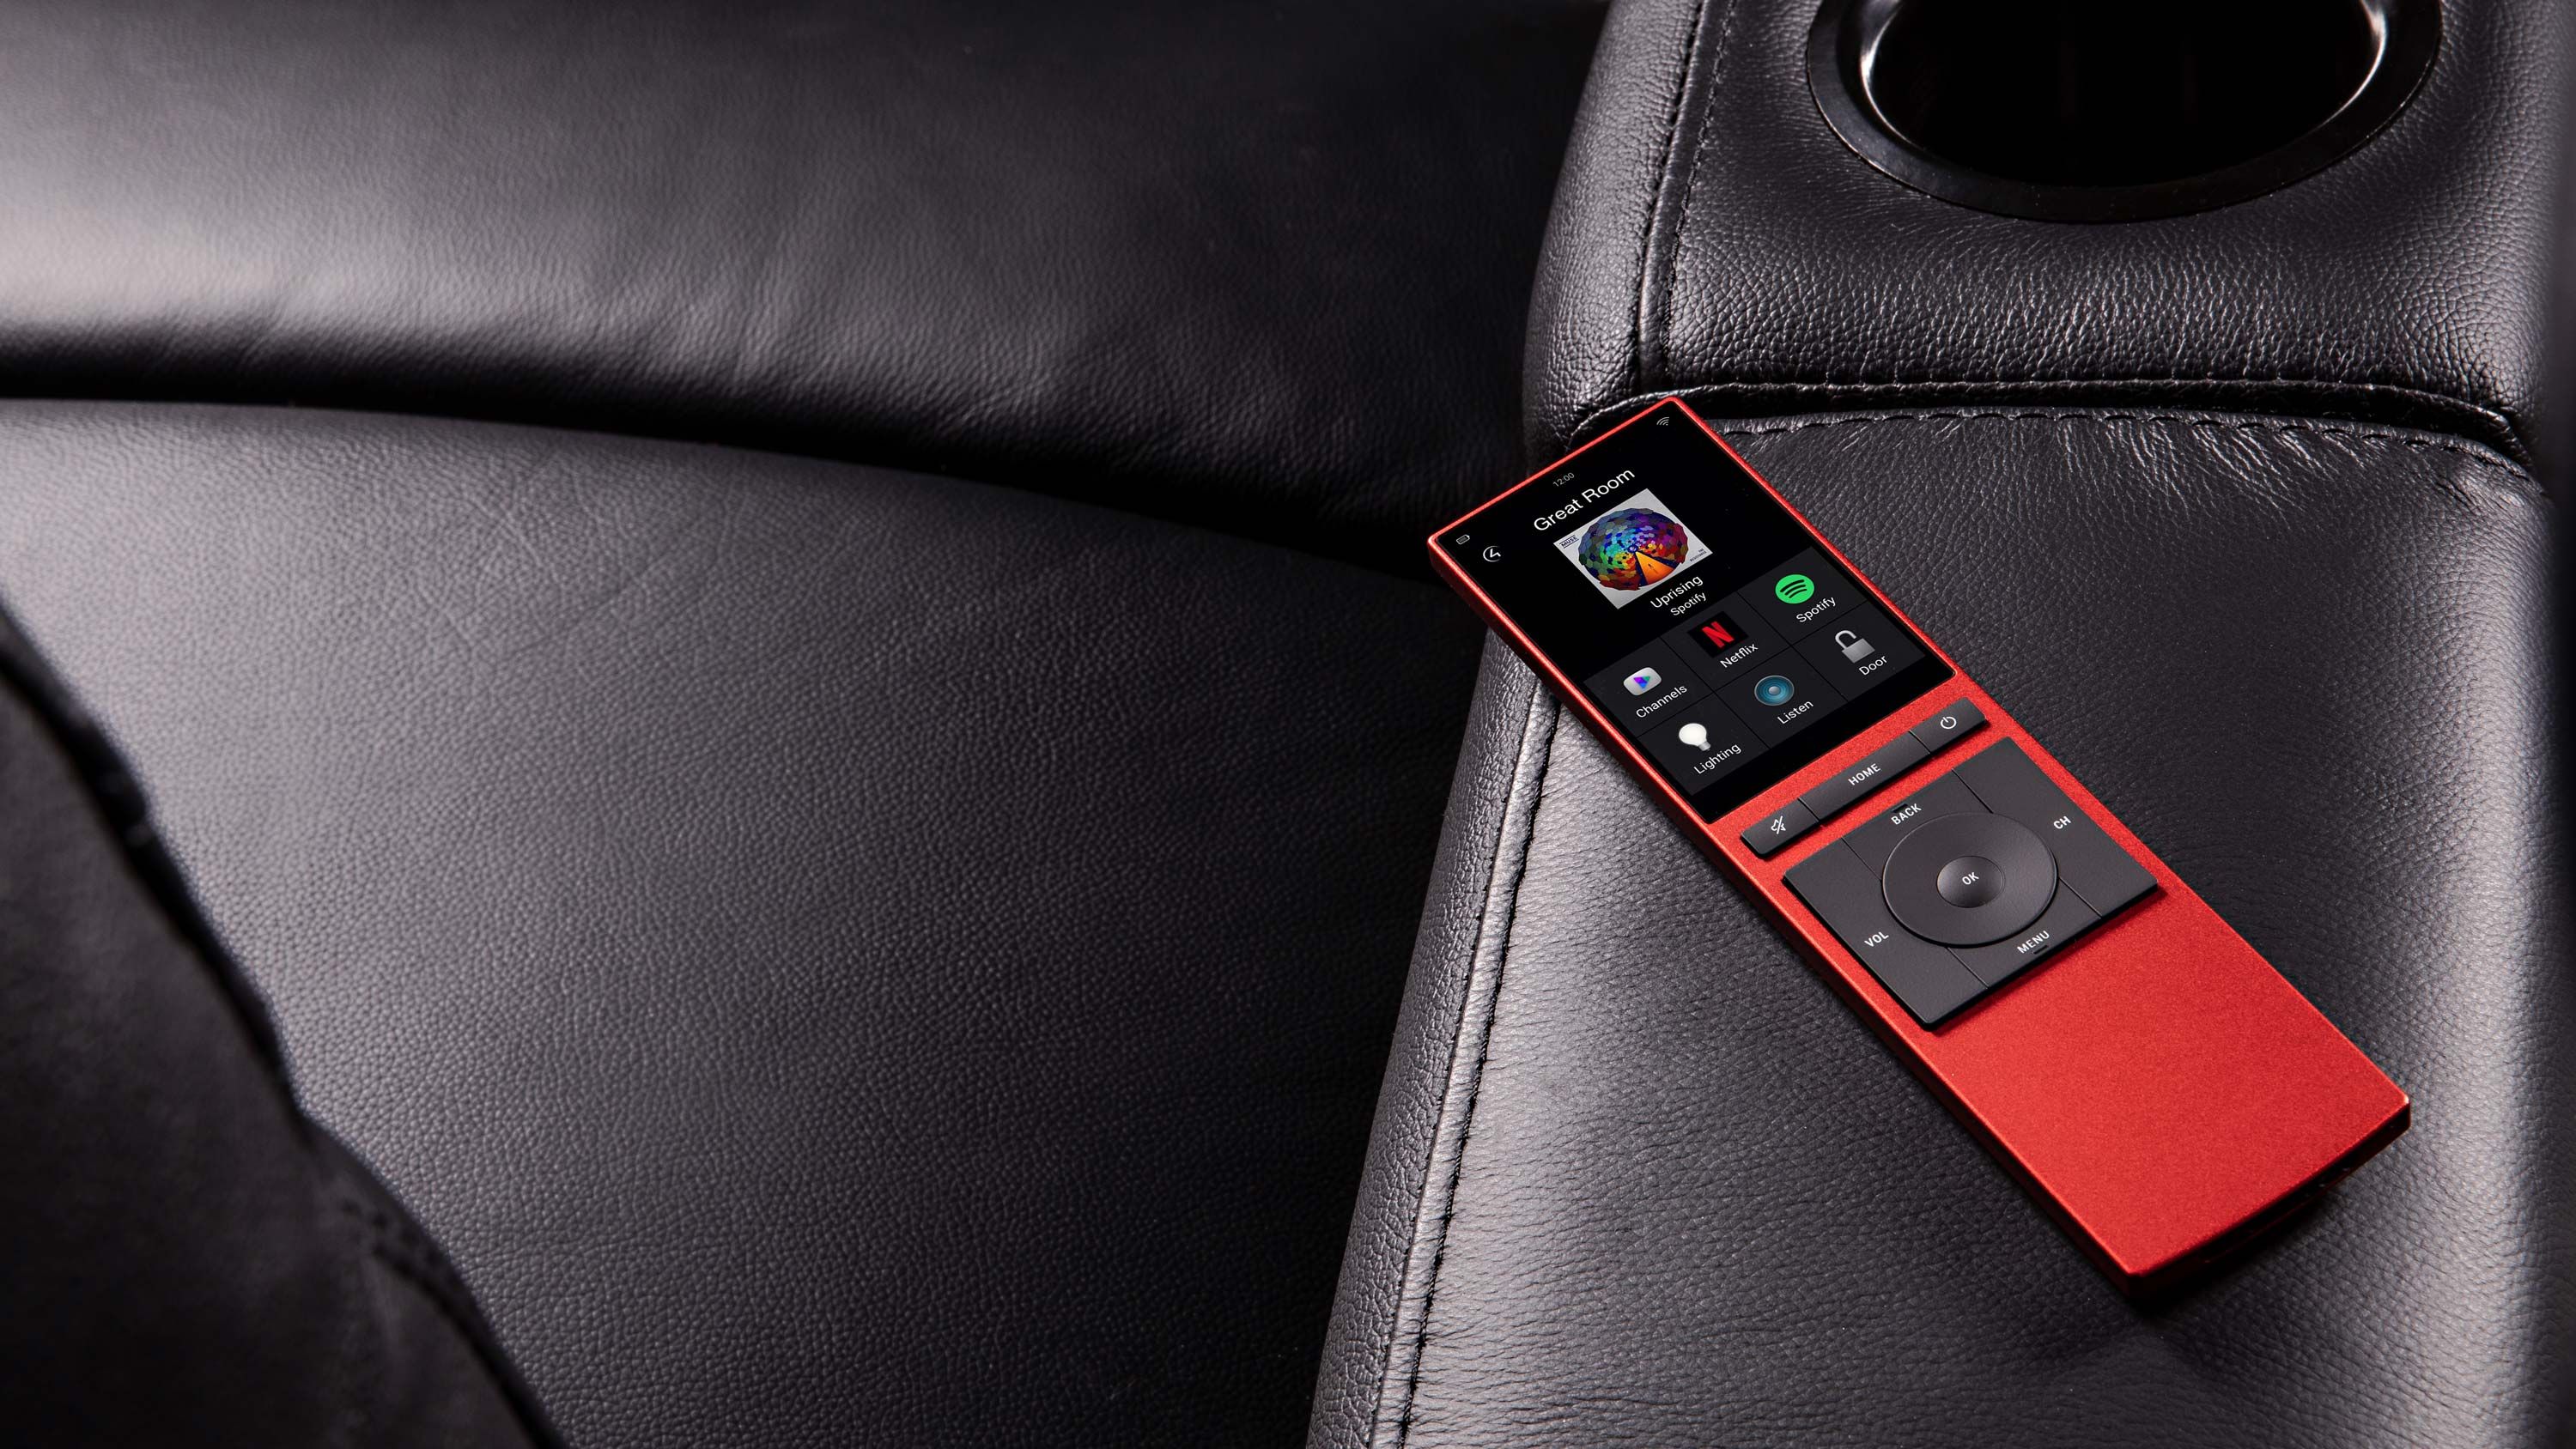 Red control4 neeo remote on black couch